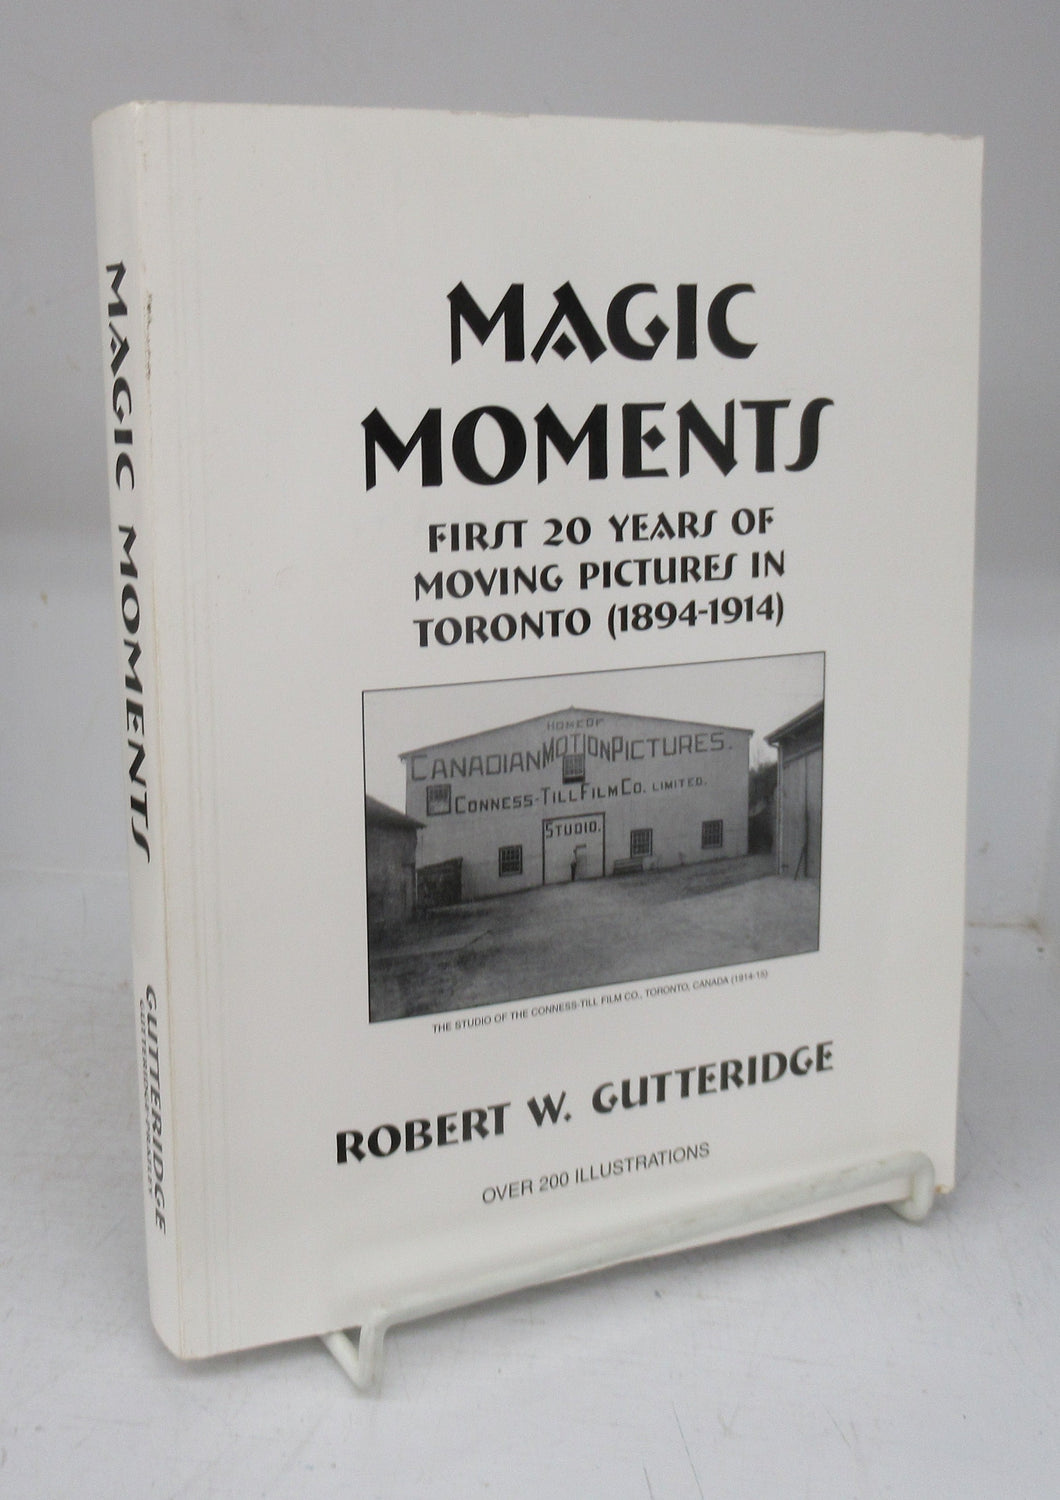 Magic Moments: First 20 Years of Moving Pictues in Toronto (1894-1914)